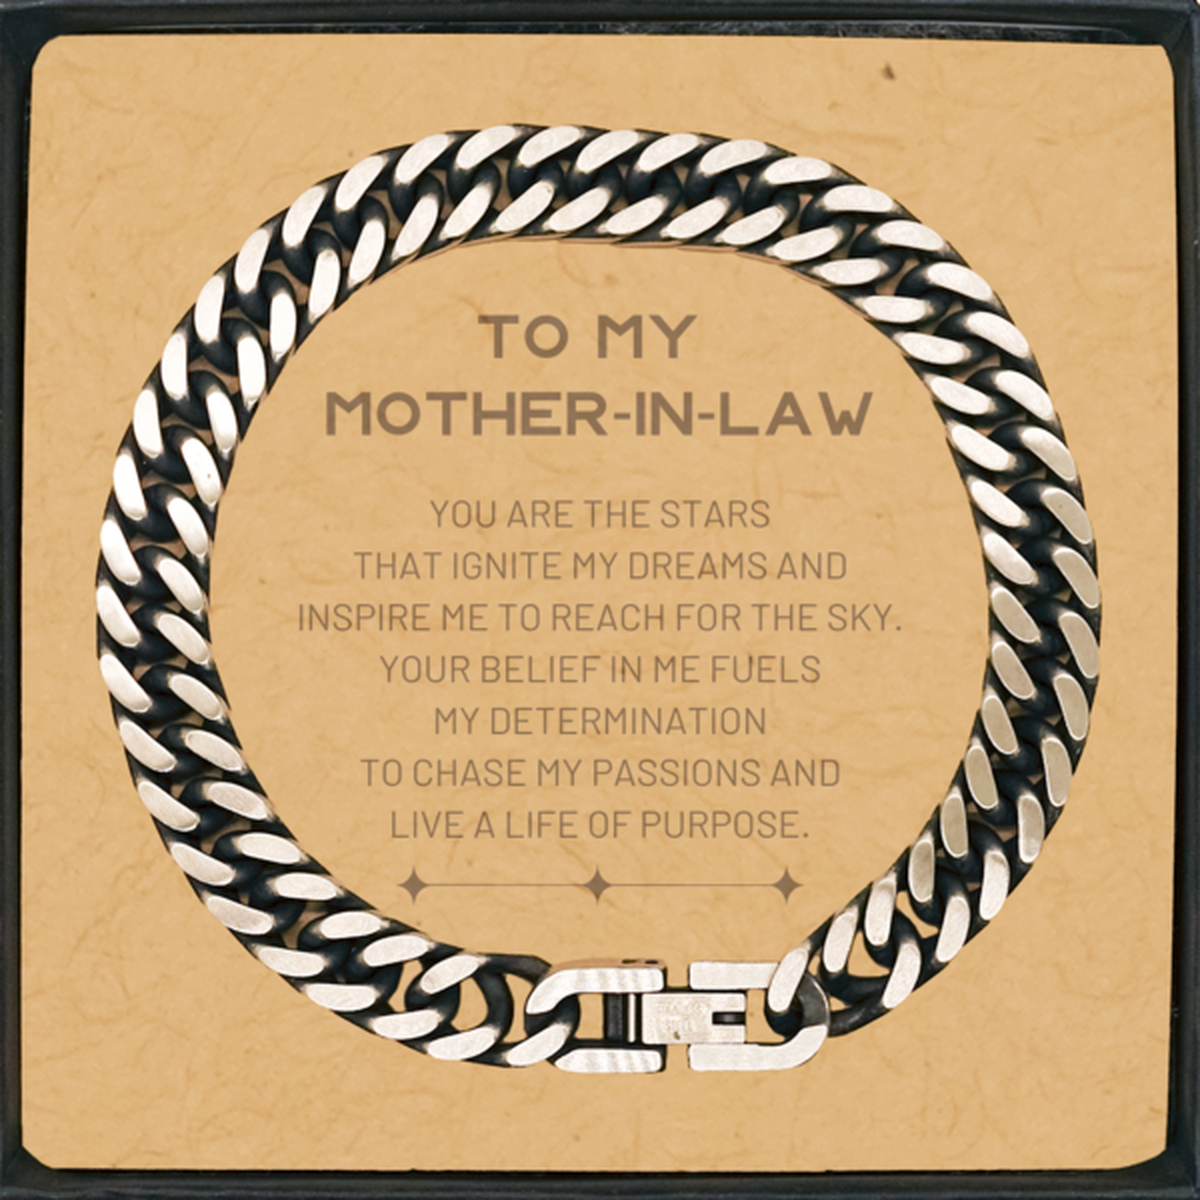 To My Mother-In-Law Cuban Link Chain Bracelet, You are the stars that ignite my dreams and inspire me to reach for the sky, Birthday Unique Gifts For Mother-In-Law, Thank You Gifts For Mother-In-Law